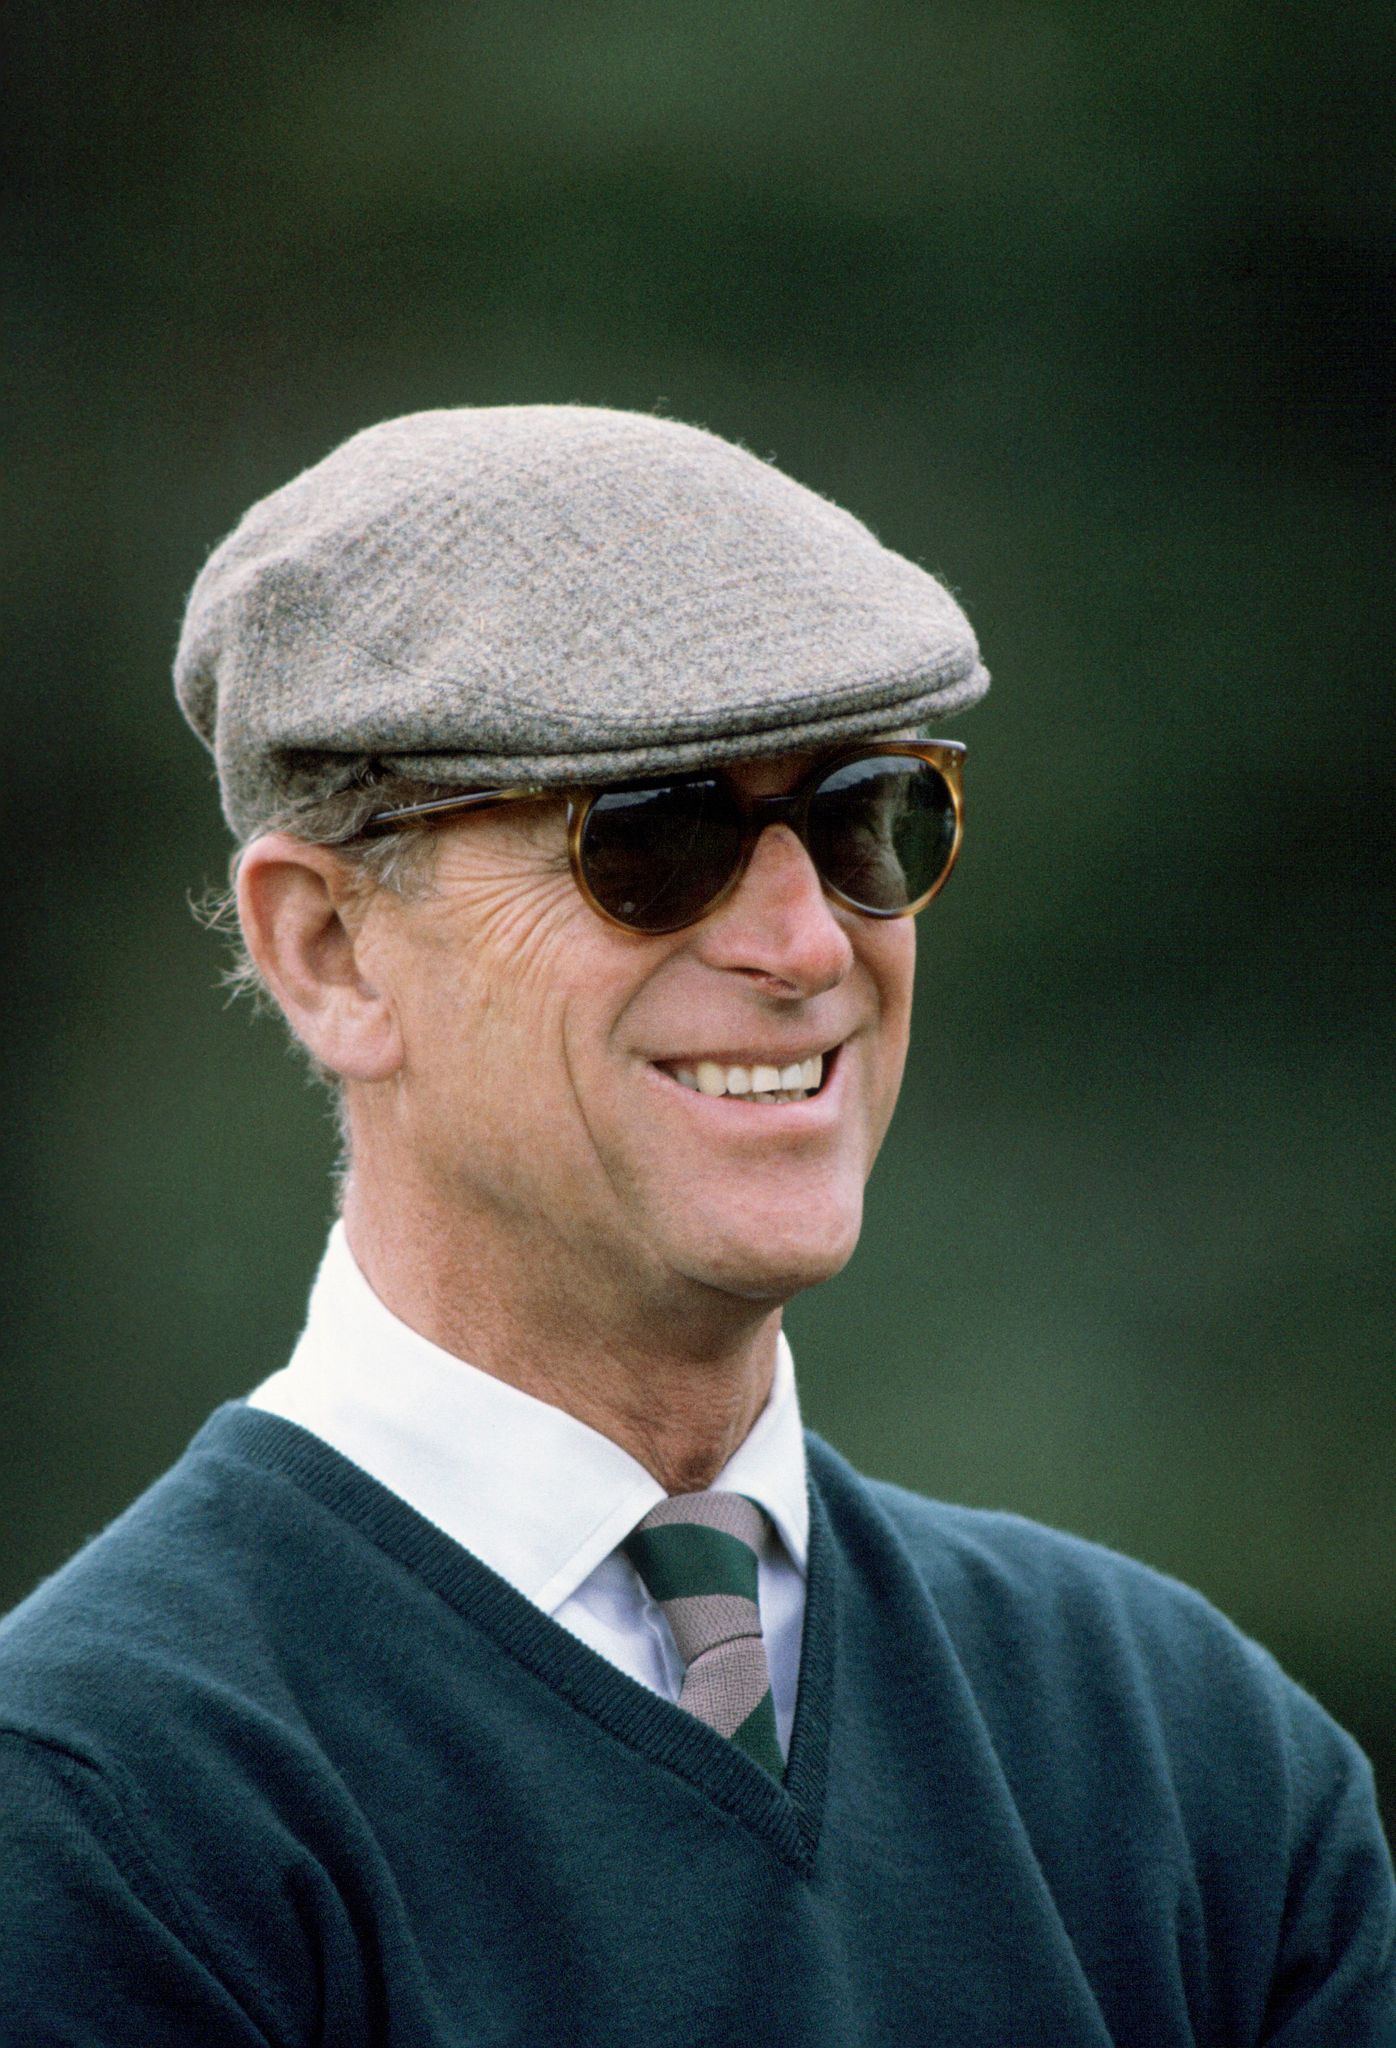 Prince Philip wearing sunglasses and a cap at Windsor Great Park during the Windsor Horse Show, circa 1990s. | Photo: Getty Images